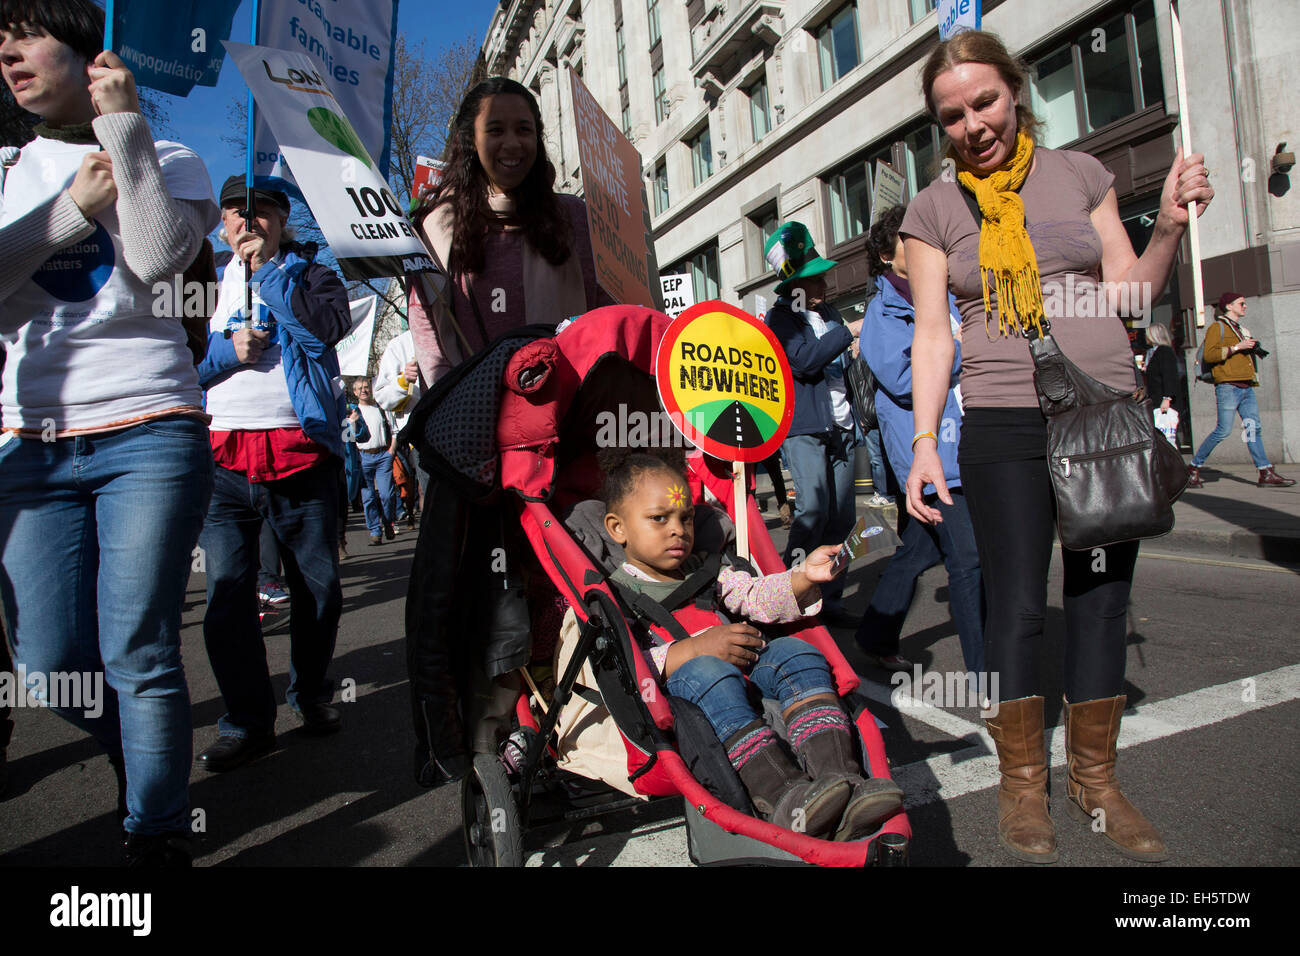 London, UK. Saturday 7th March 2015. Time to Act. Campaign against Climate Change demonstration. Demonstrators gathered in their tens of thousands to protest against all kinds of environmental issues such as fracking, clean air, alternative energies and generally all business which puts profit before the environment. Credit:  Michael Kemp/Alamy Live News Stock Photo